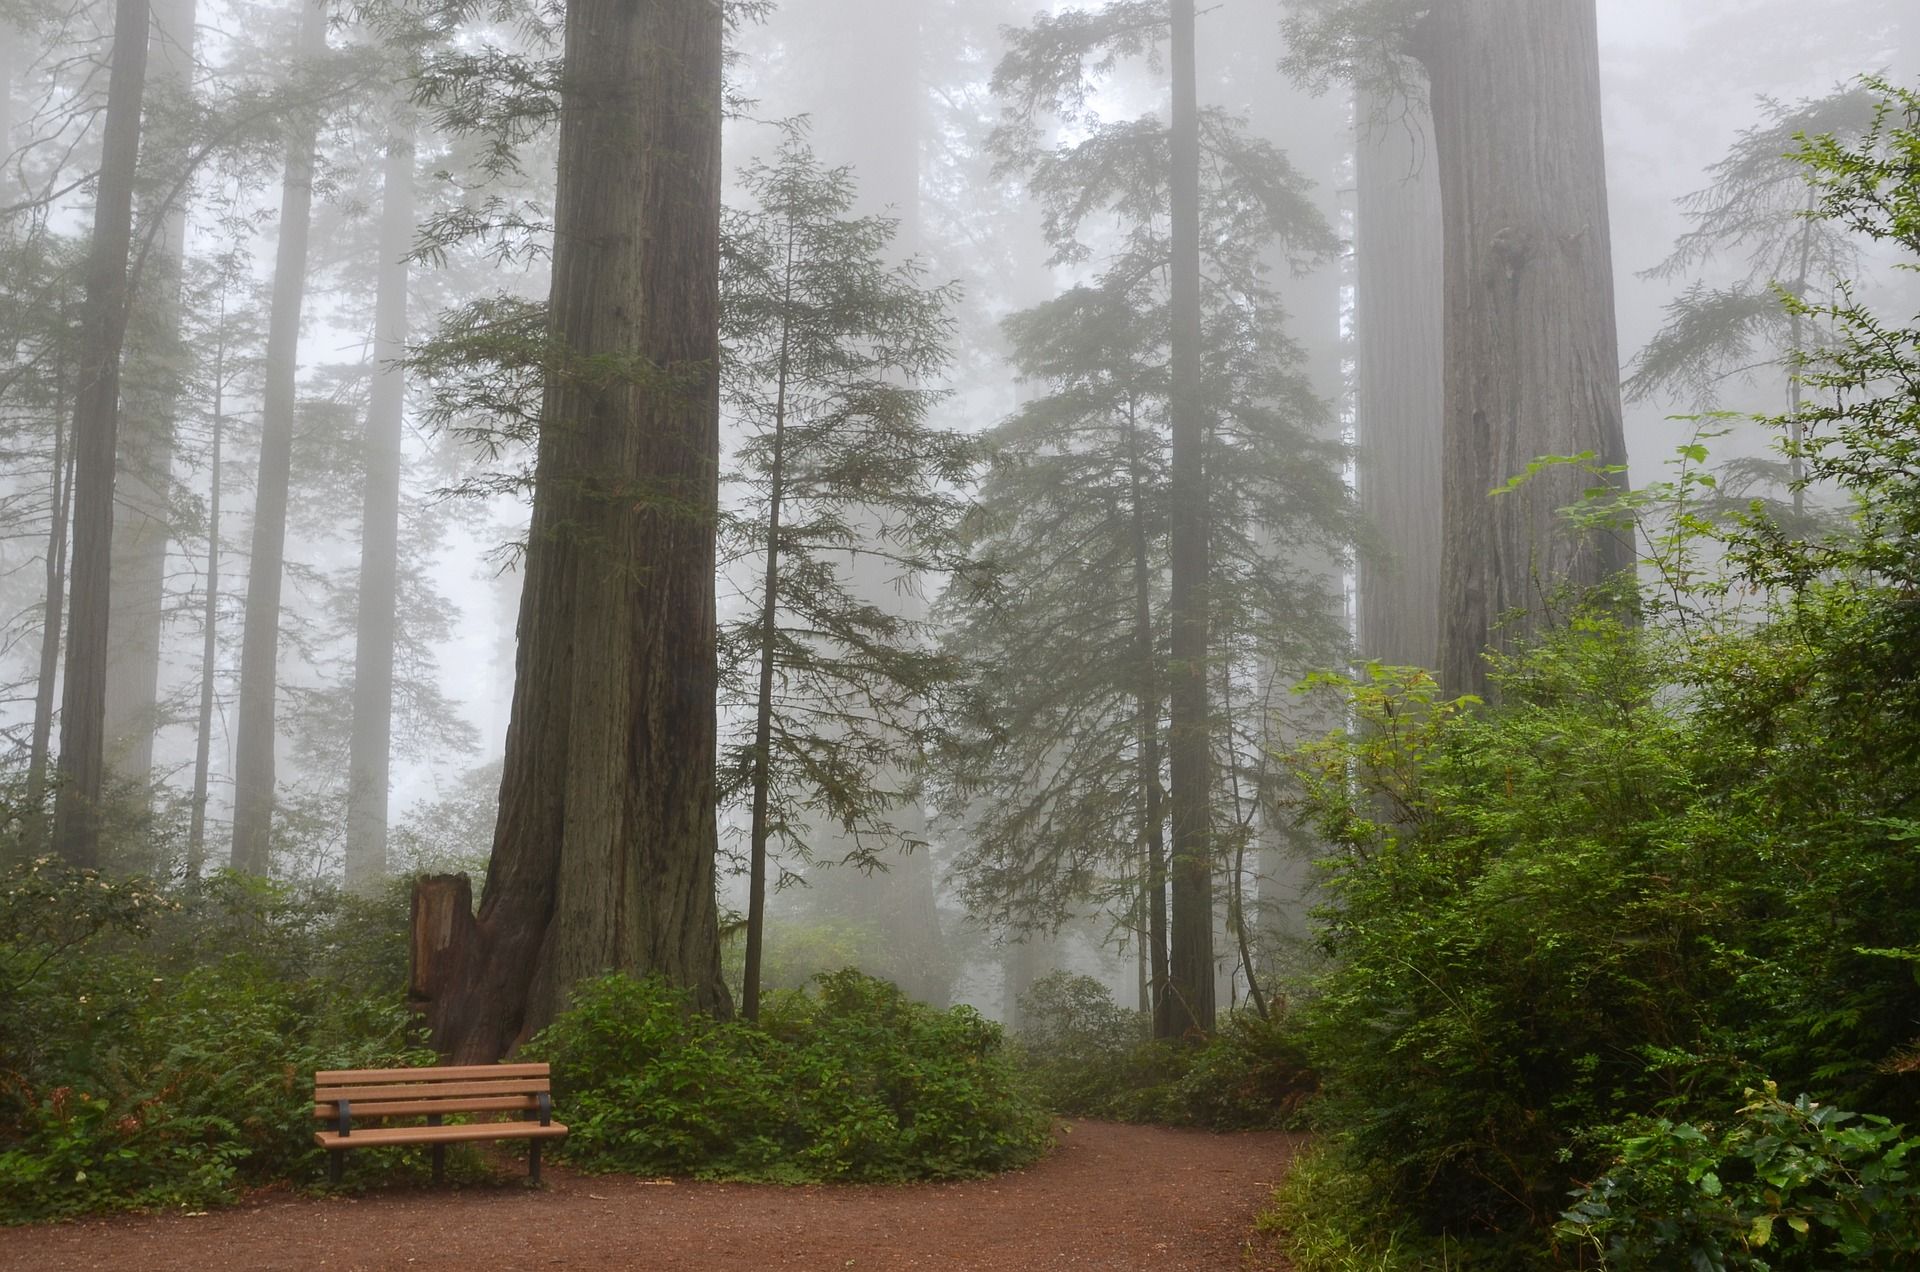 An empty bench amidst redwoods and mist at the Lady Bird Johnson Grove, California